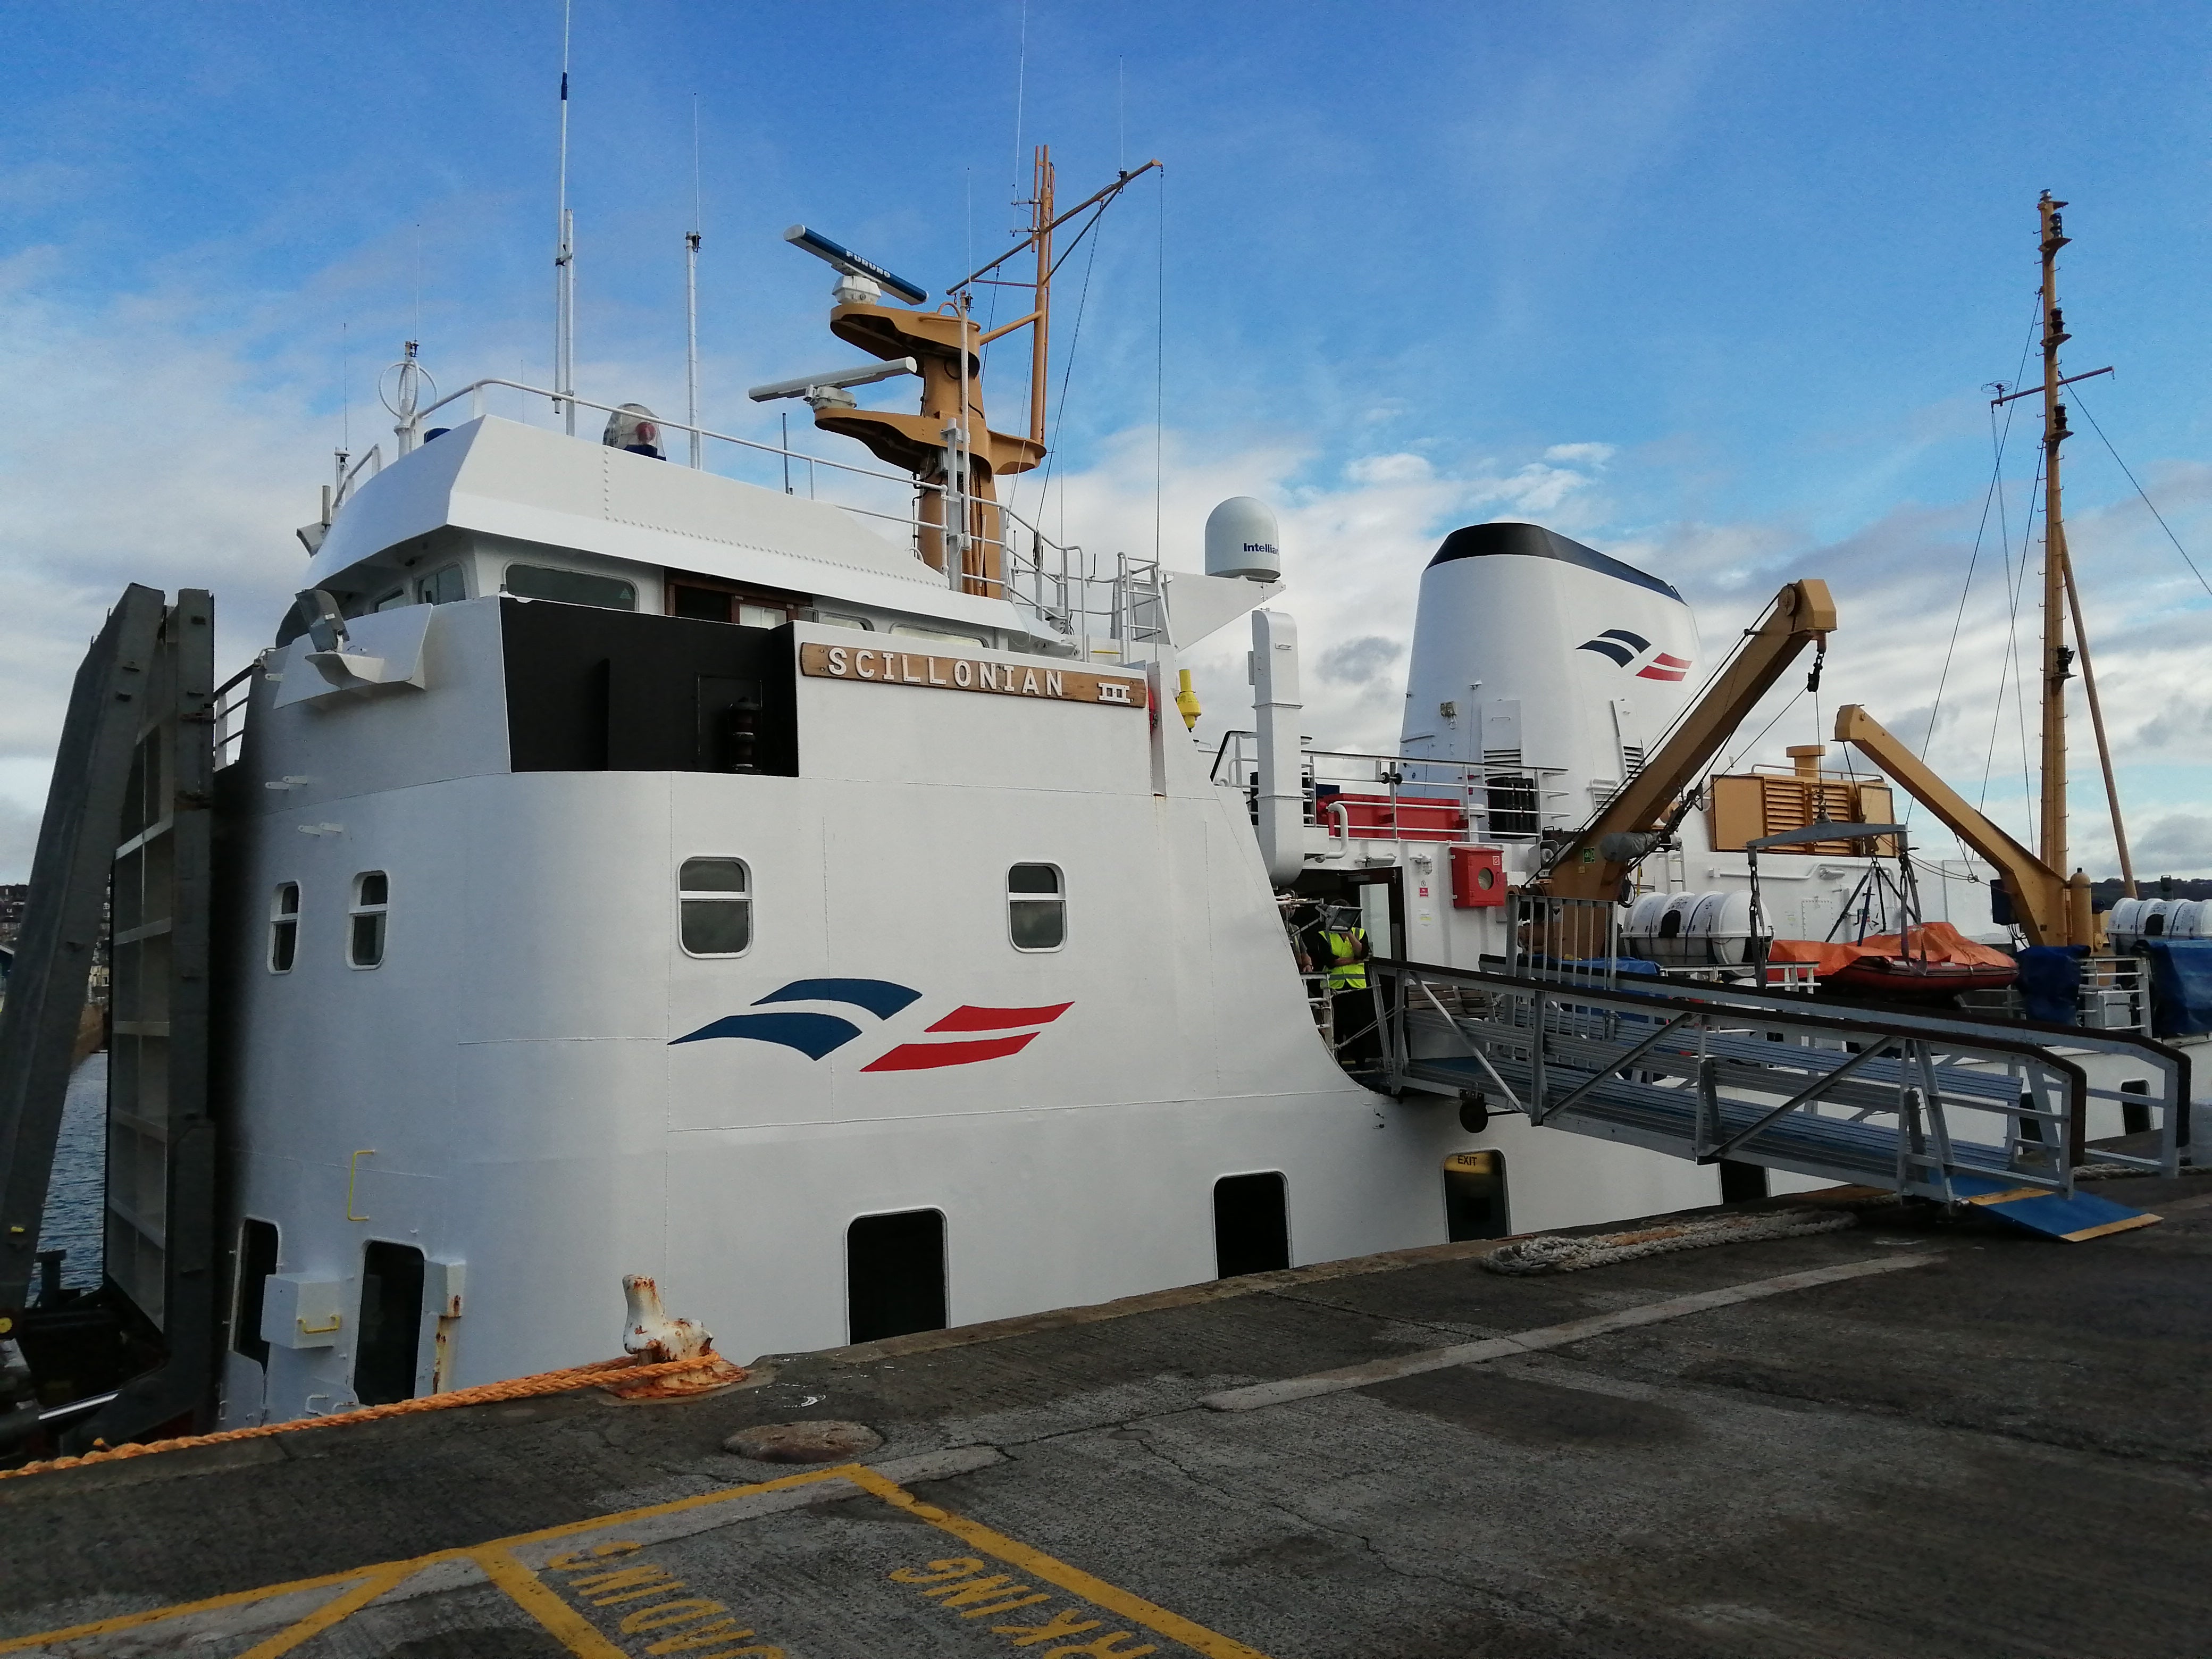 The Scillonian III can be a kind or a cruel mistress, depending on the weather